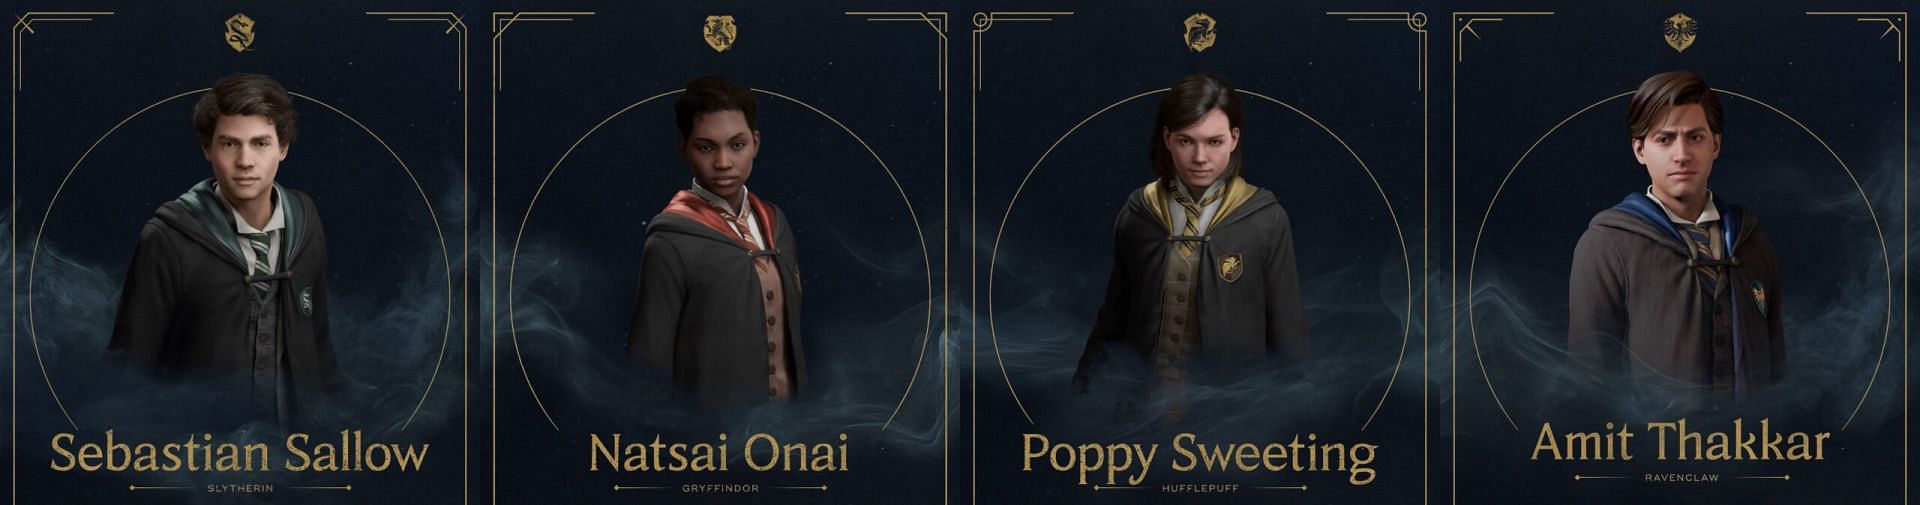 Companions who can be befriended in Hogwarts Legacy (Image Credits: Warner Bros)